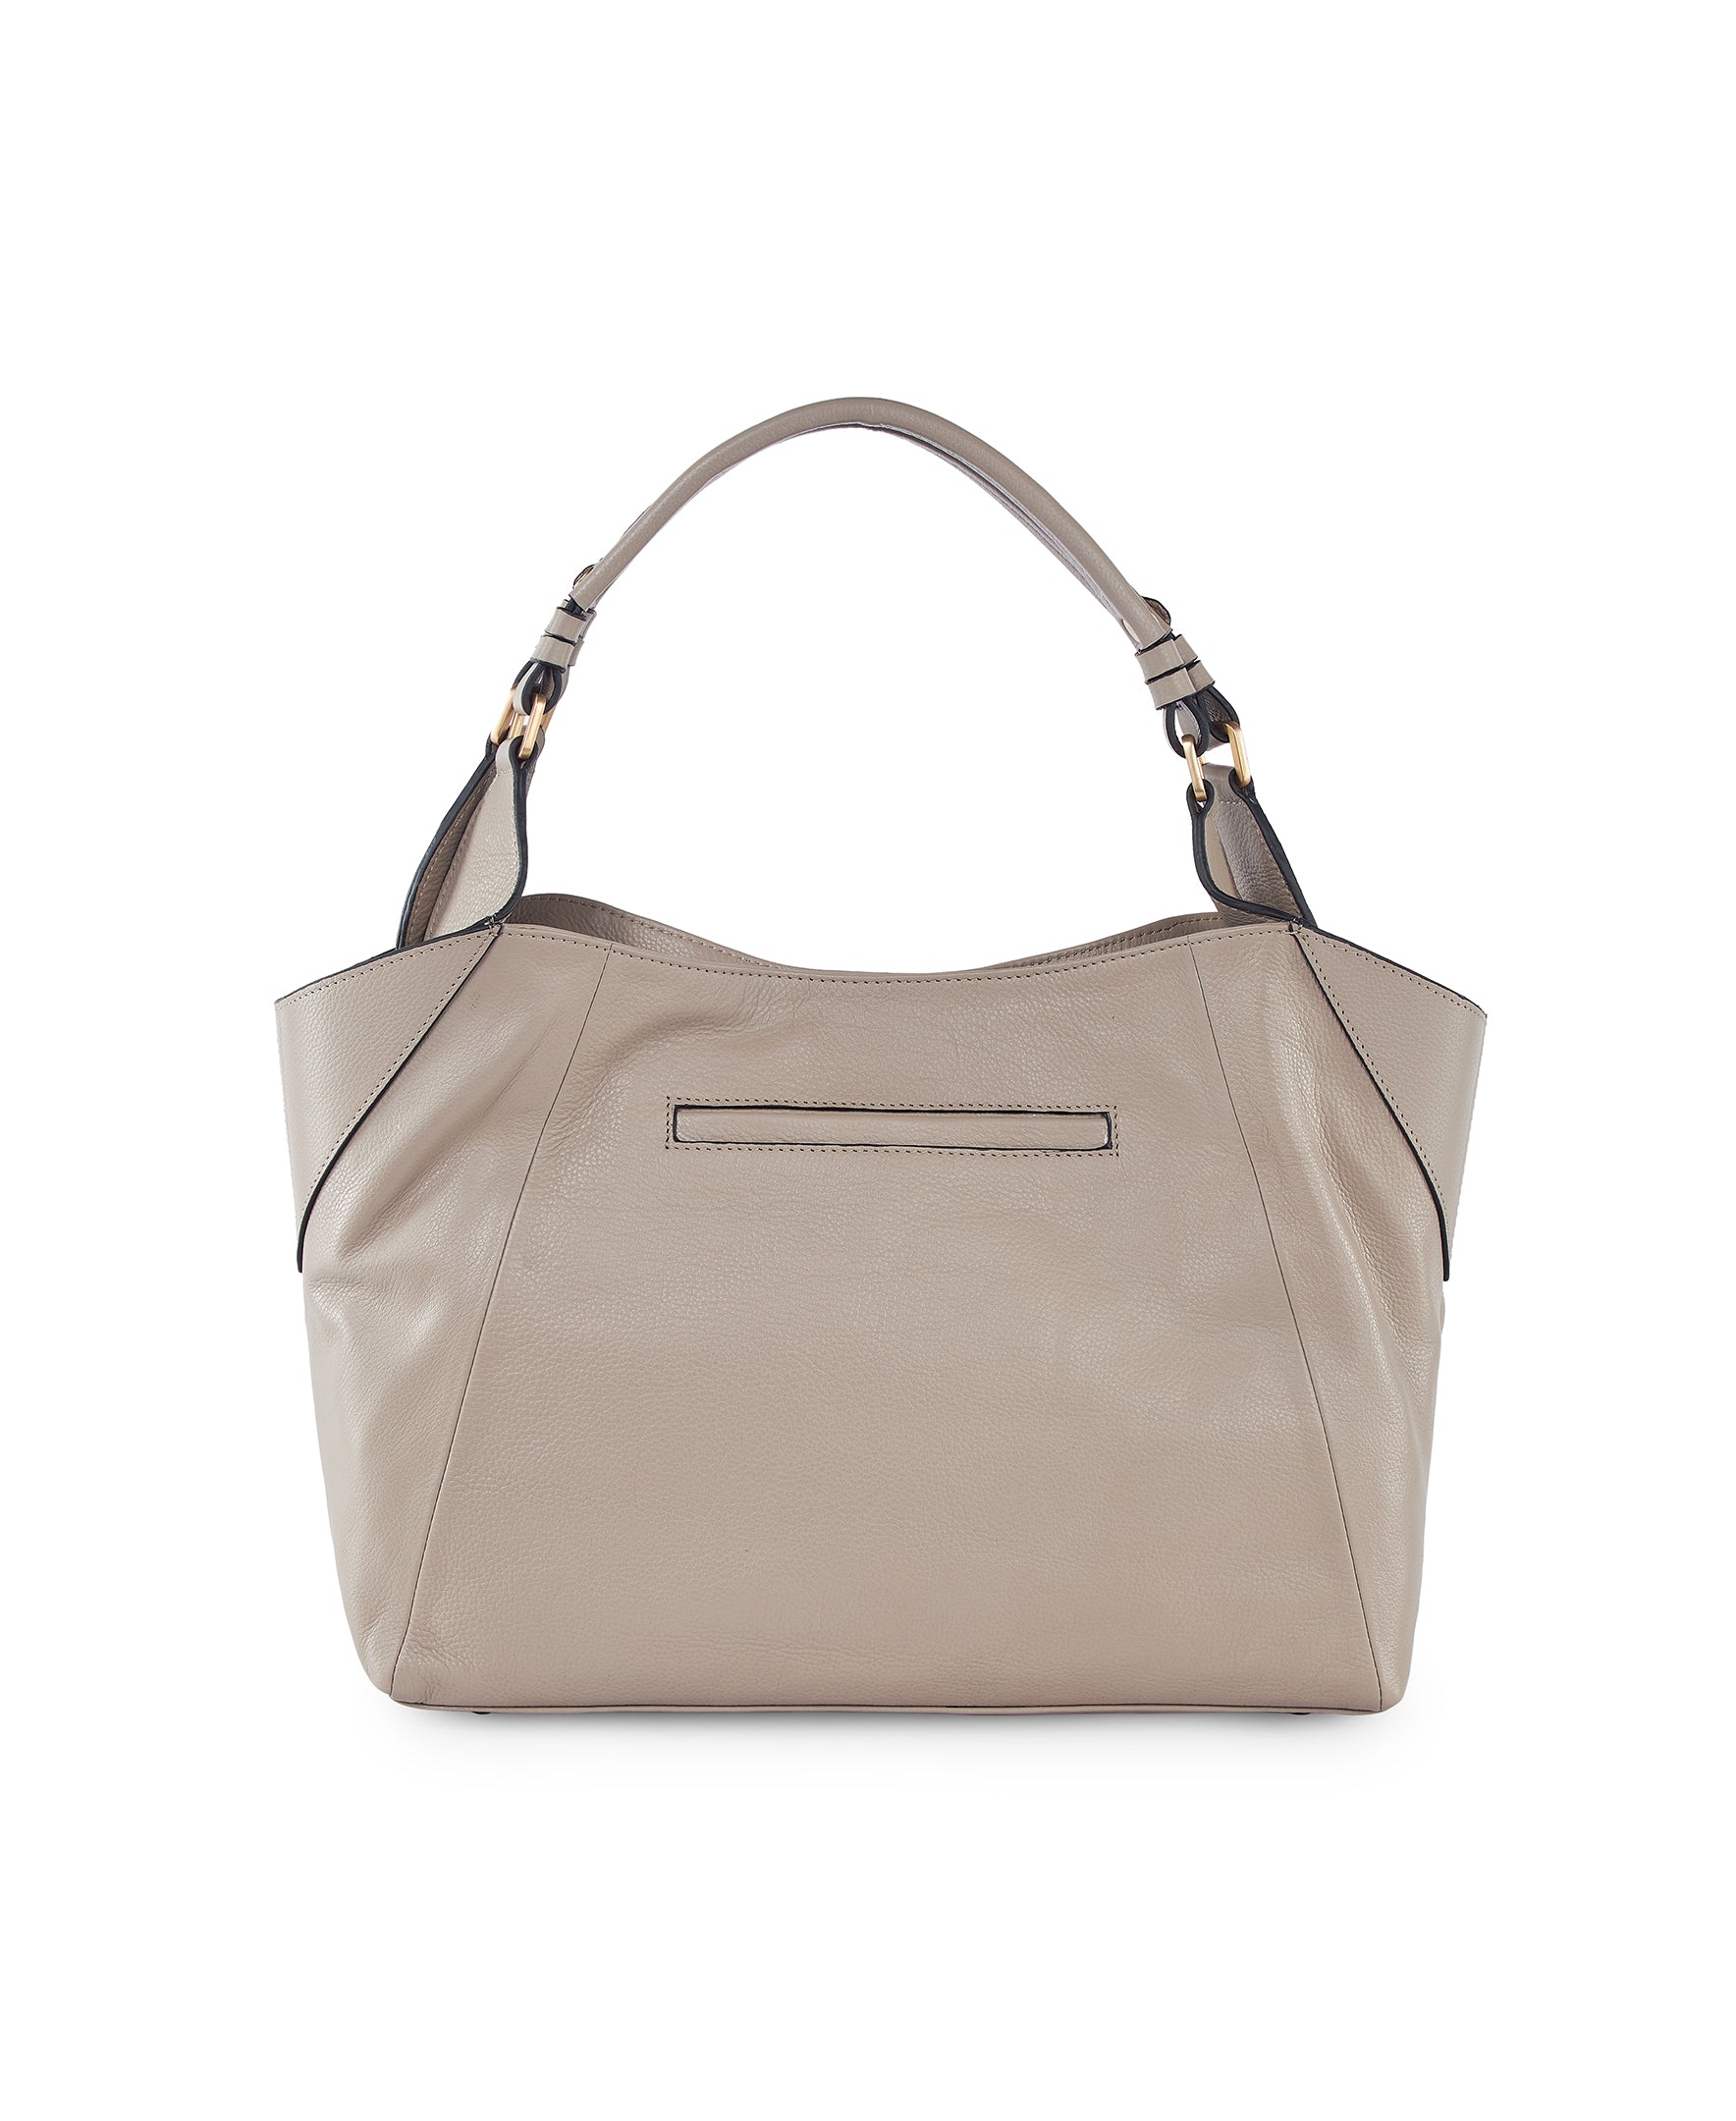 Shop Now  Perfect Size Tote For perfect Elegance | Lodis